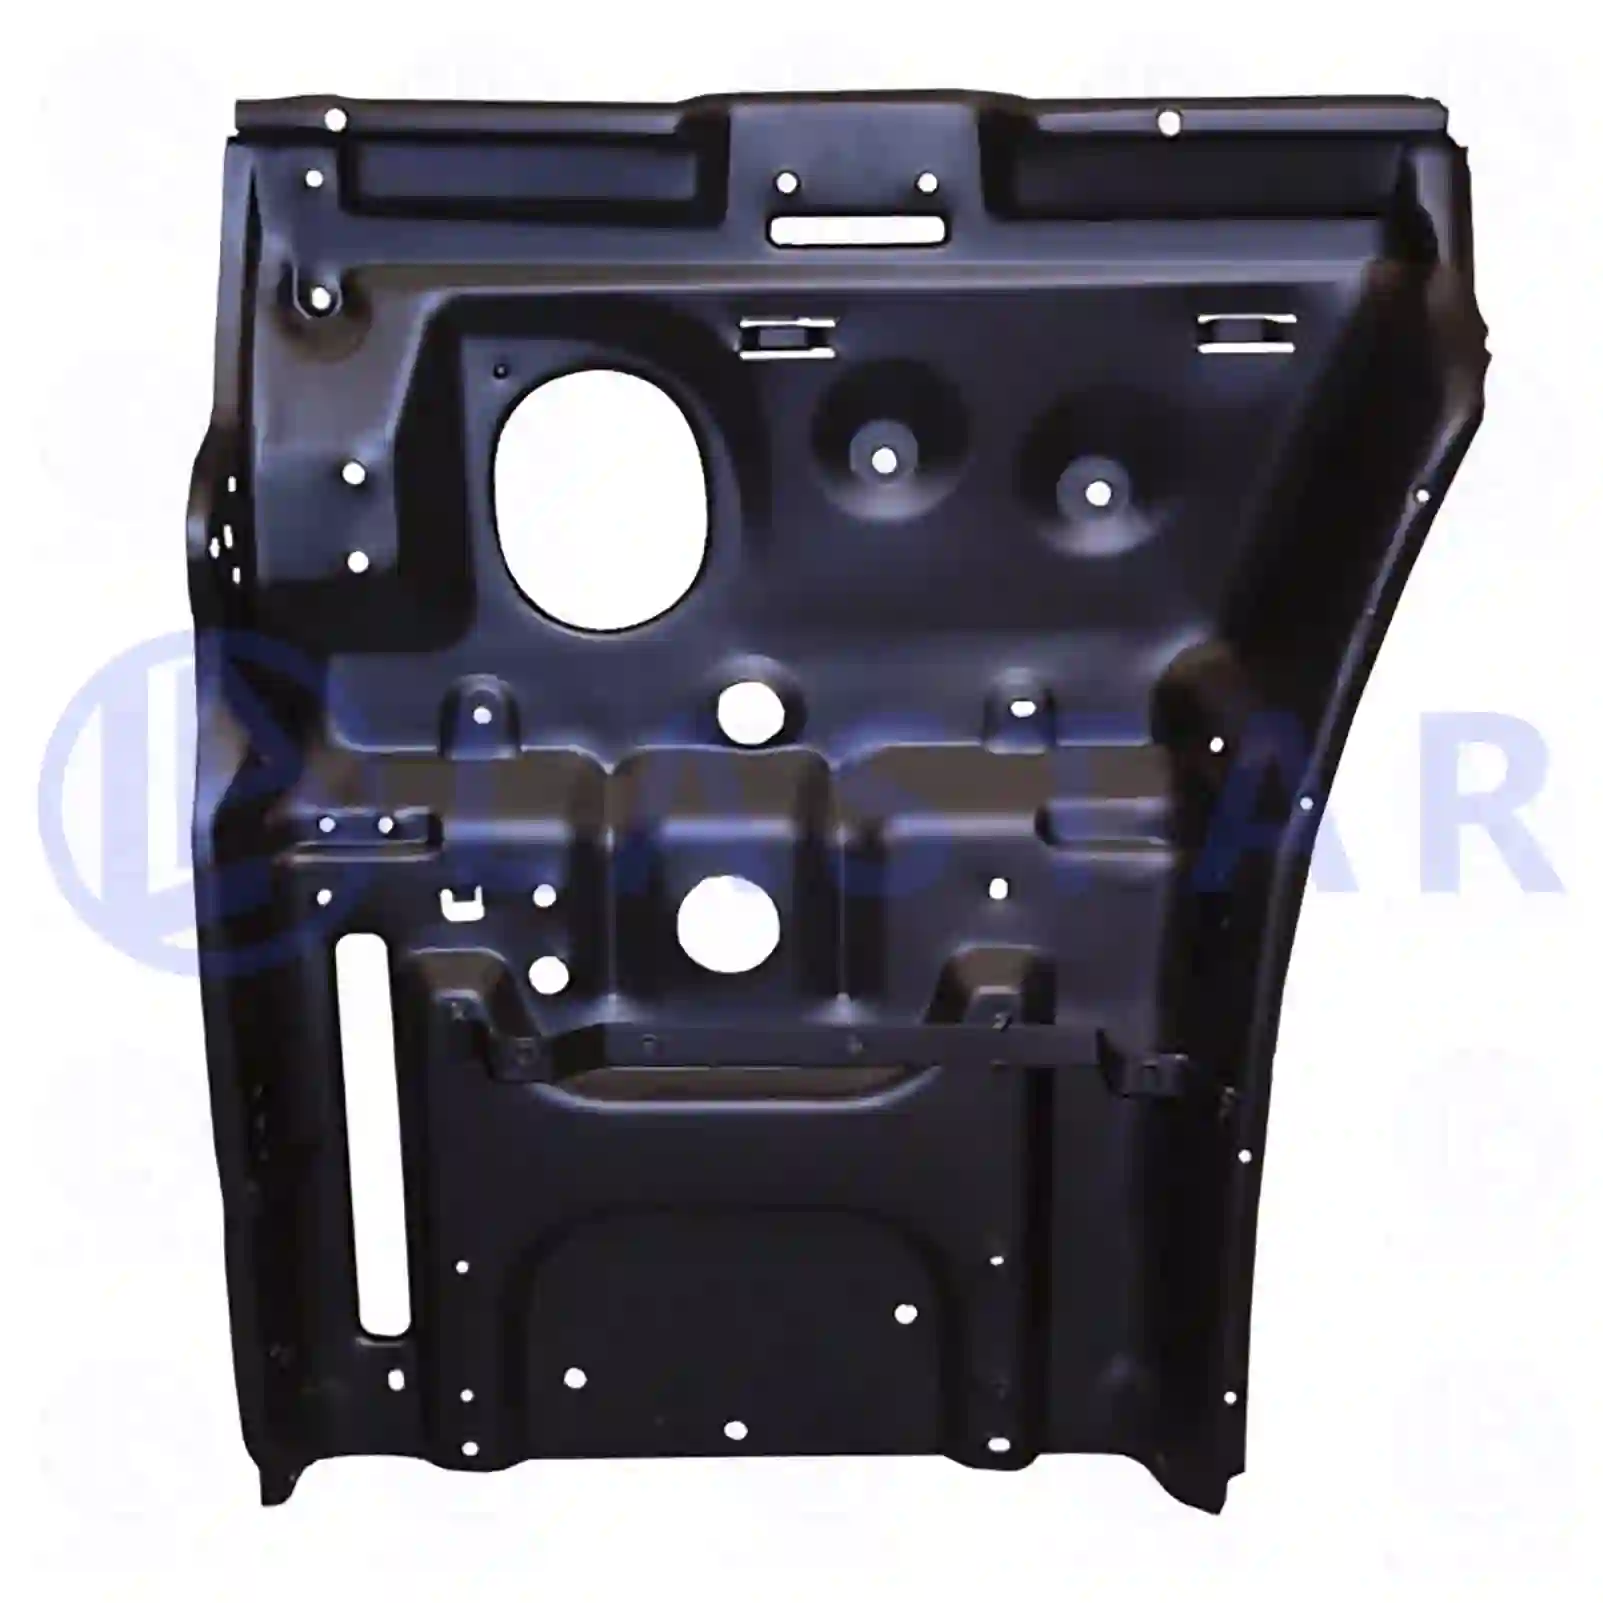 Step well case, left, 77719730, 1351193, 1515195, 515195, ZG61178-0008 ||  77719730 Lastar Spare Part | Truck Spare Parts, Auotomotive Spare Parts Step well case, left, 77719730, 1351193, 1515195, 515195, ZG61178-0008 ||  77719730 Lastar Spare Part | Truck Spare Parts, Auotomotive Spare Parts